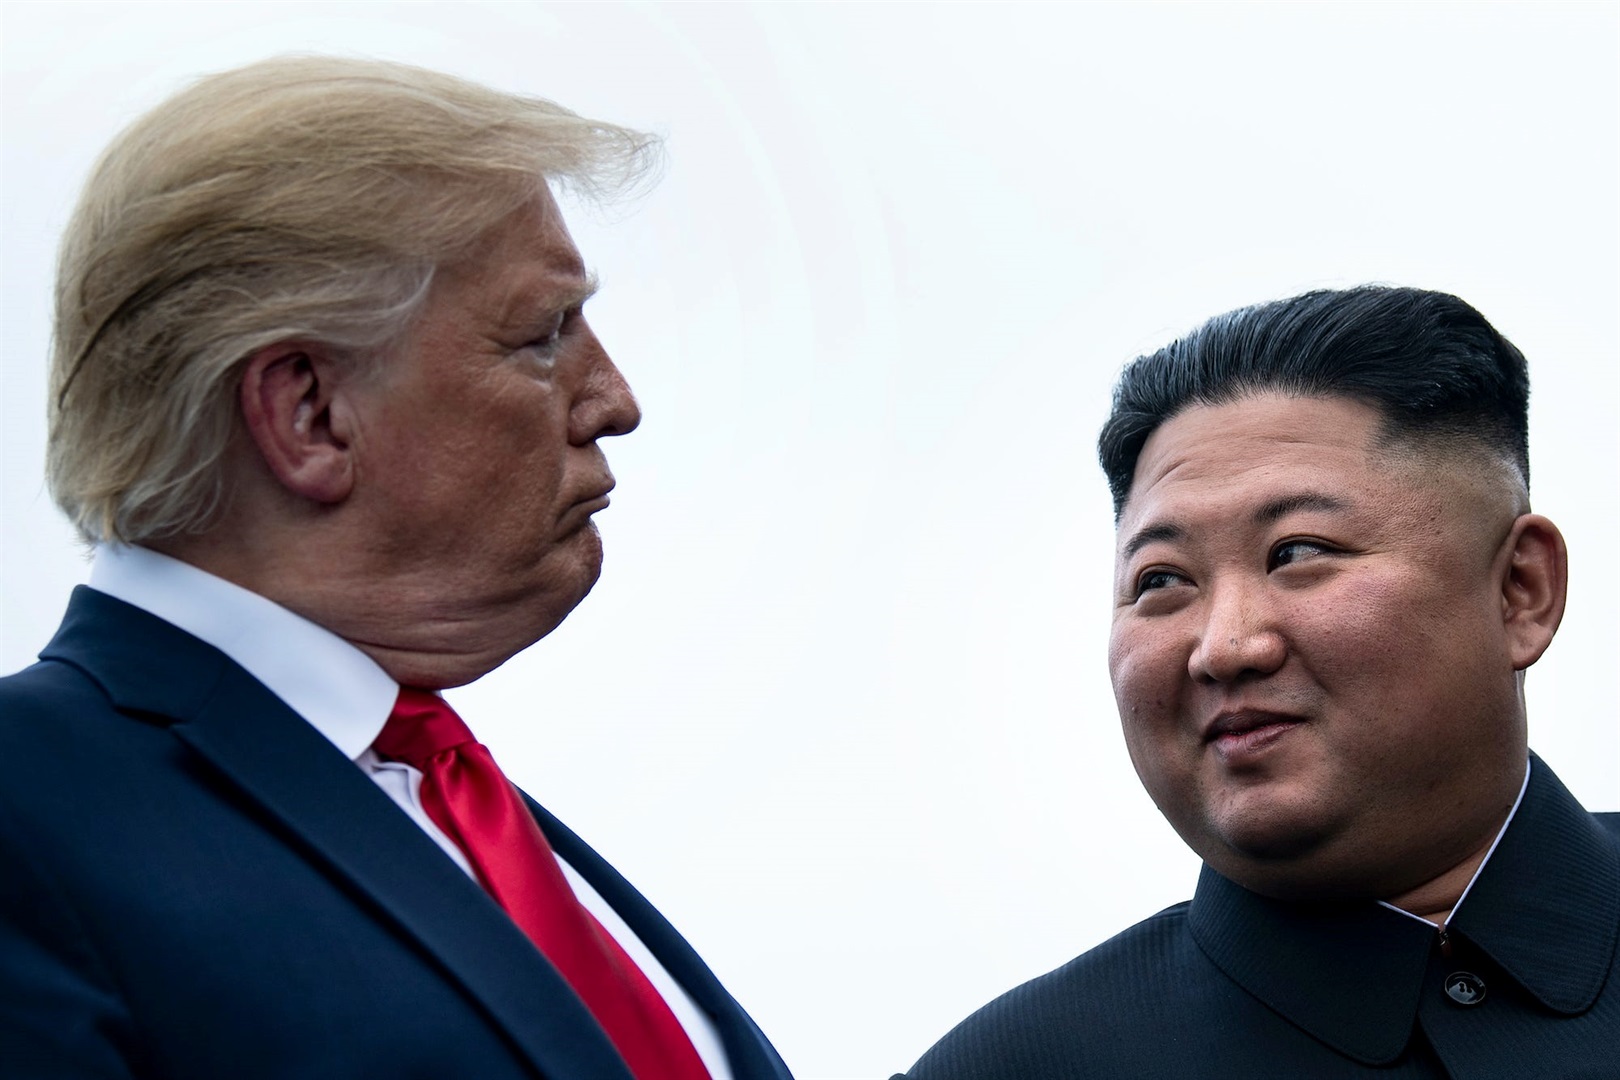 Businessinsider.co.za | Trump had to explain his 'Little Rocket Man' nickname to Kim Jong Un, Mike Pompeo says in new book